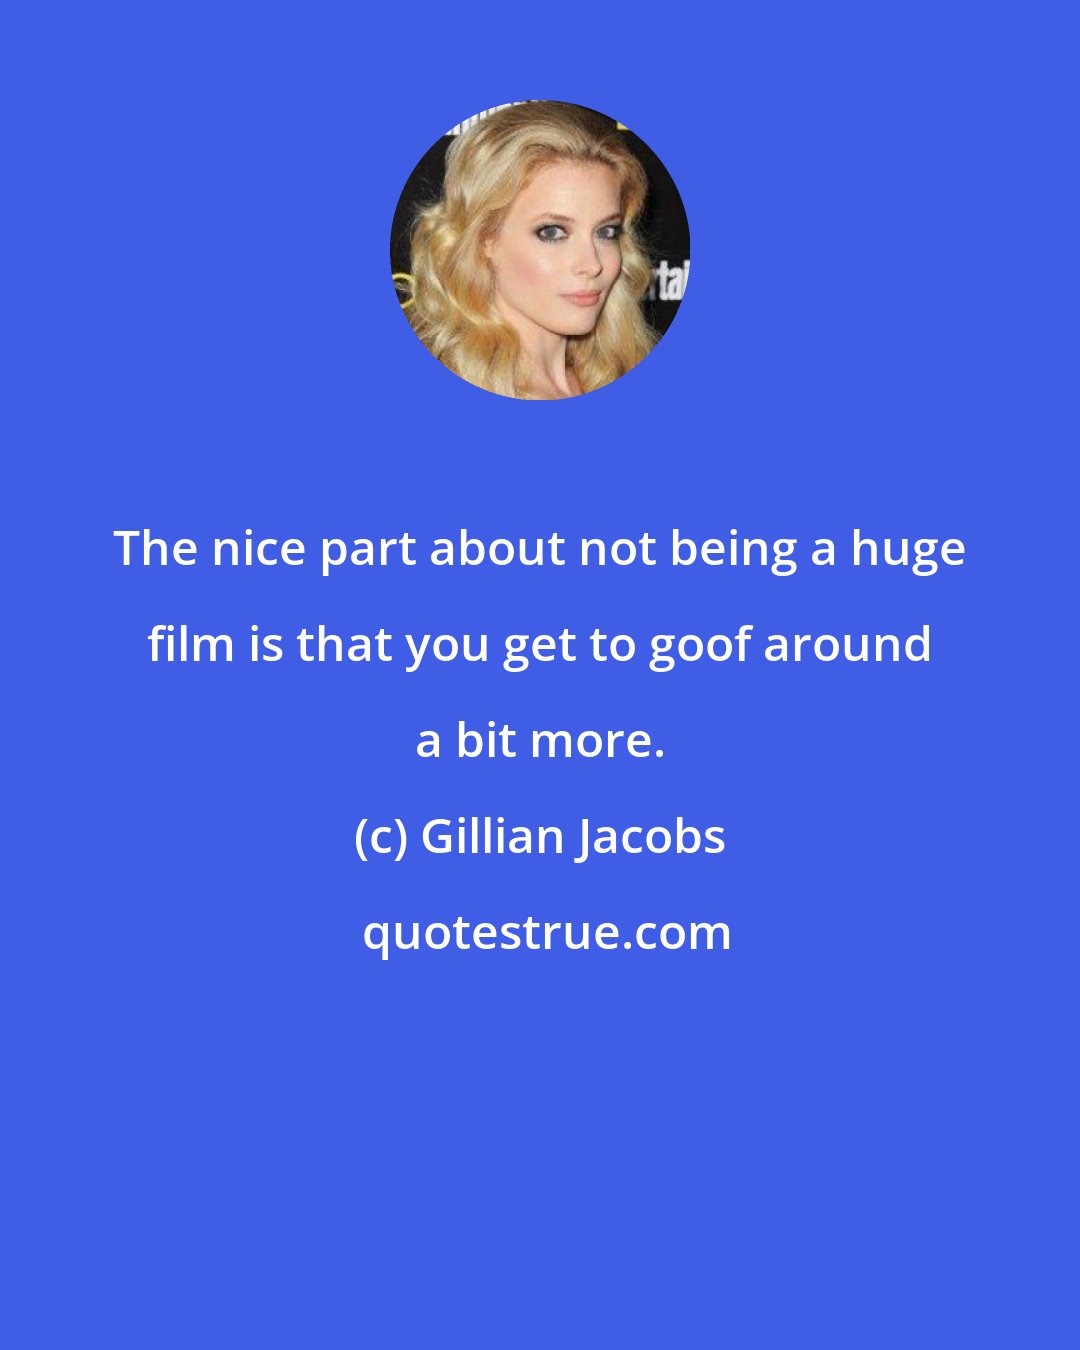 Gillian Jacobs: The nice part about not being a huge film is that you get to goof around a bit more.